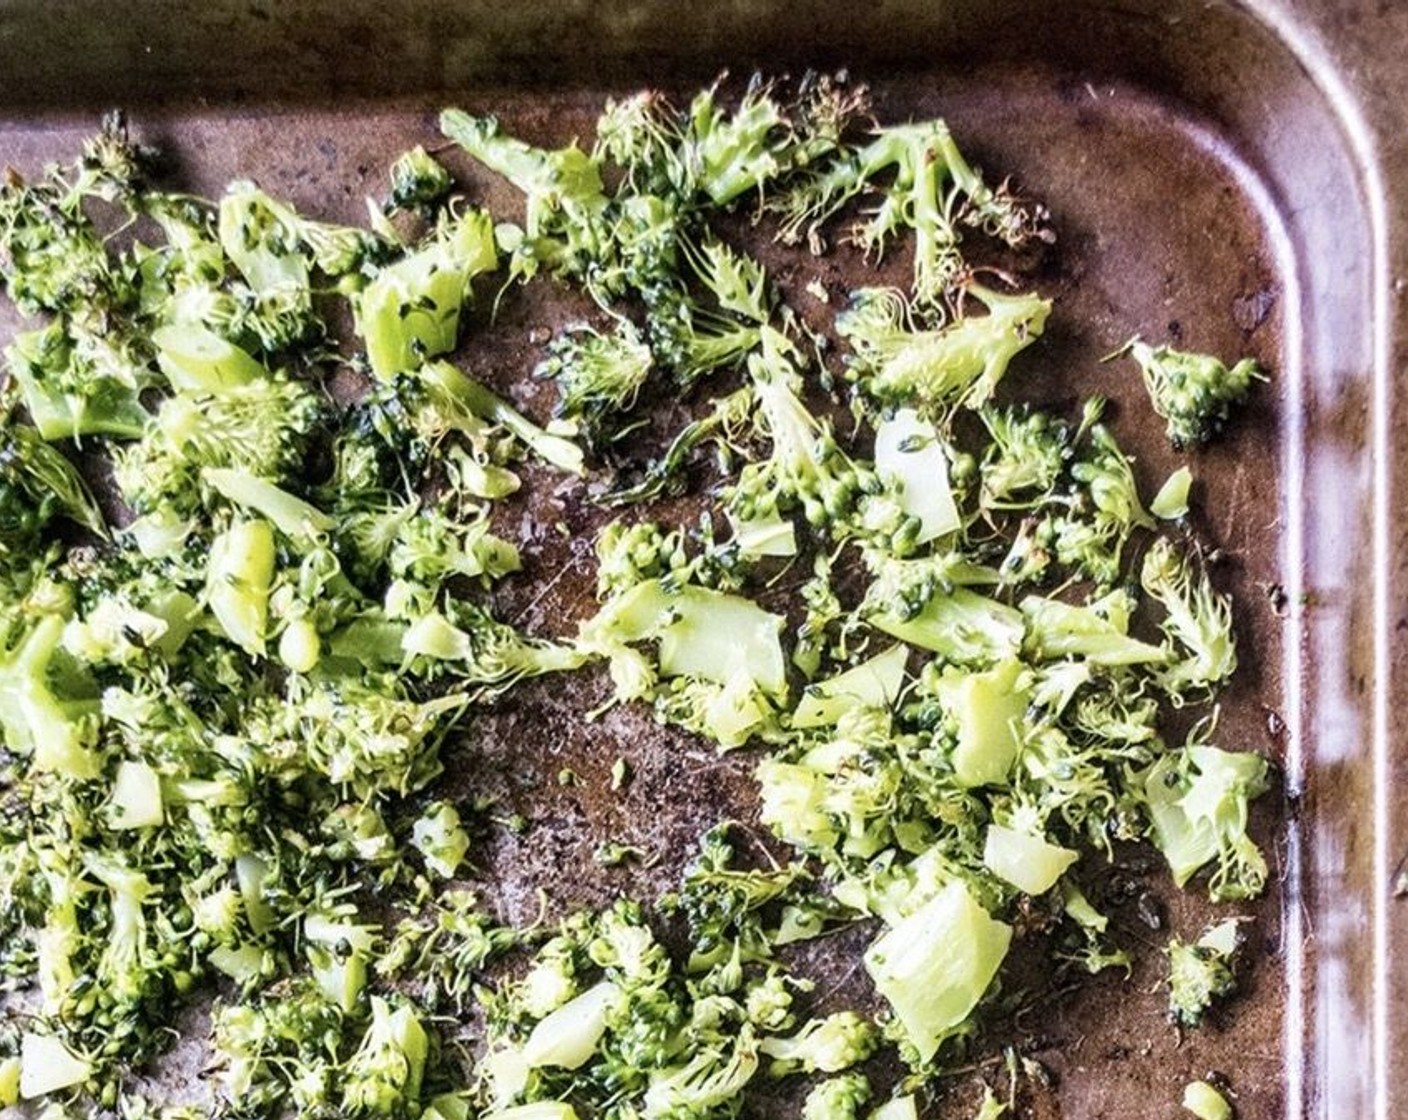 step 2 Add Broccoli (4 cups) to a large bowl, drizzle with Extra-Virgin Olive Oil (1 Tbsp), sprinkle with Salt (to taste) and Ground Black Pepper (to taste), then toss to coat. Spread the broccoli out on a large baking sheet.